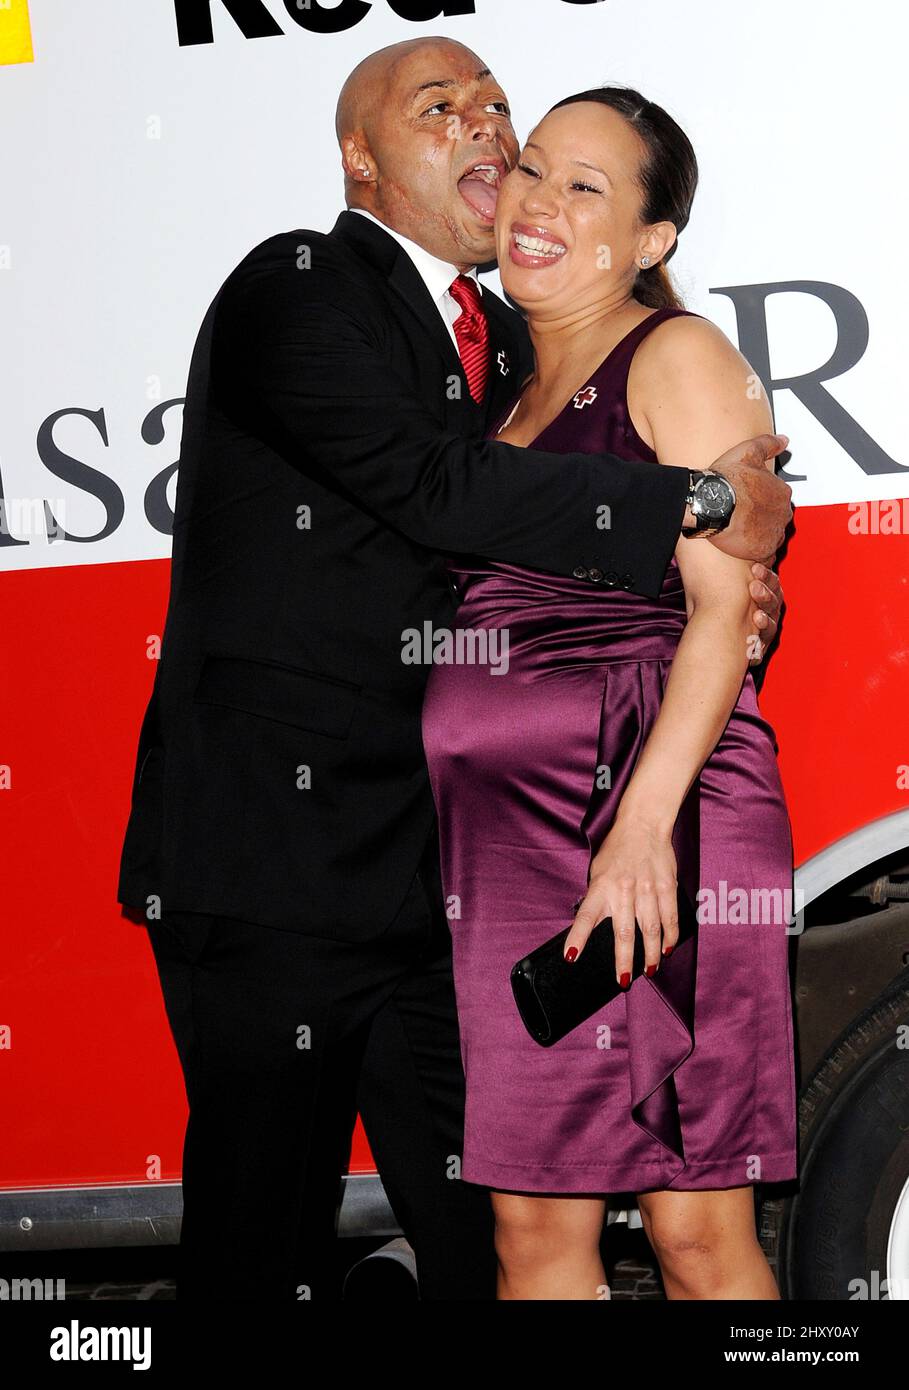 J.R. Martinez and Diana Gonzalez-Jones attends the American Red Cross Annual Red Tie Affair held at the Fairmont Hotel on April 21, 2012 in Santa Monica, California. Stock Photo